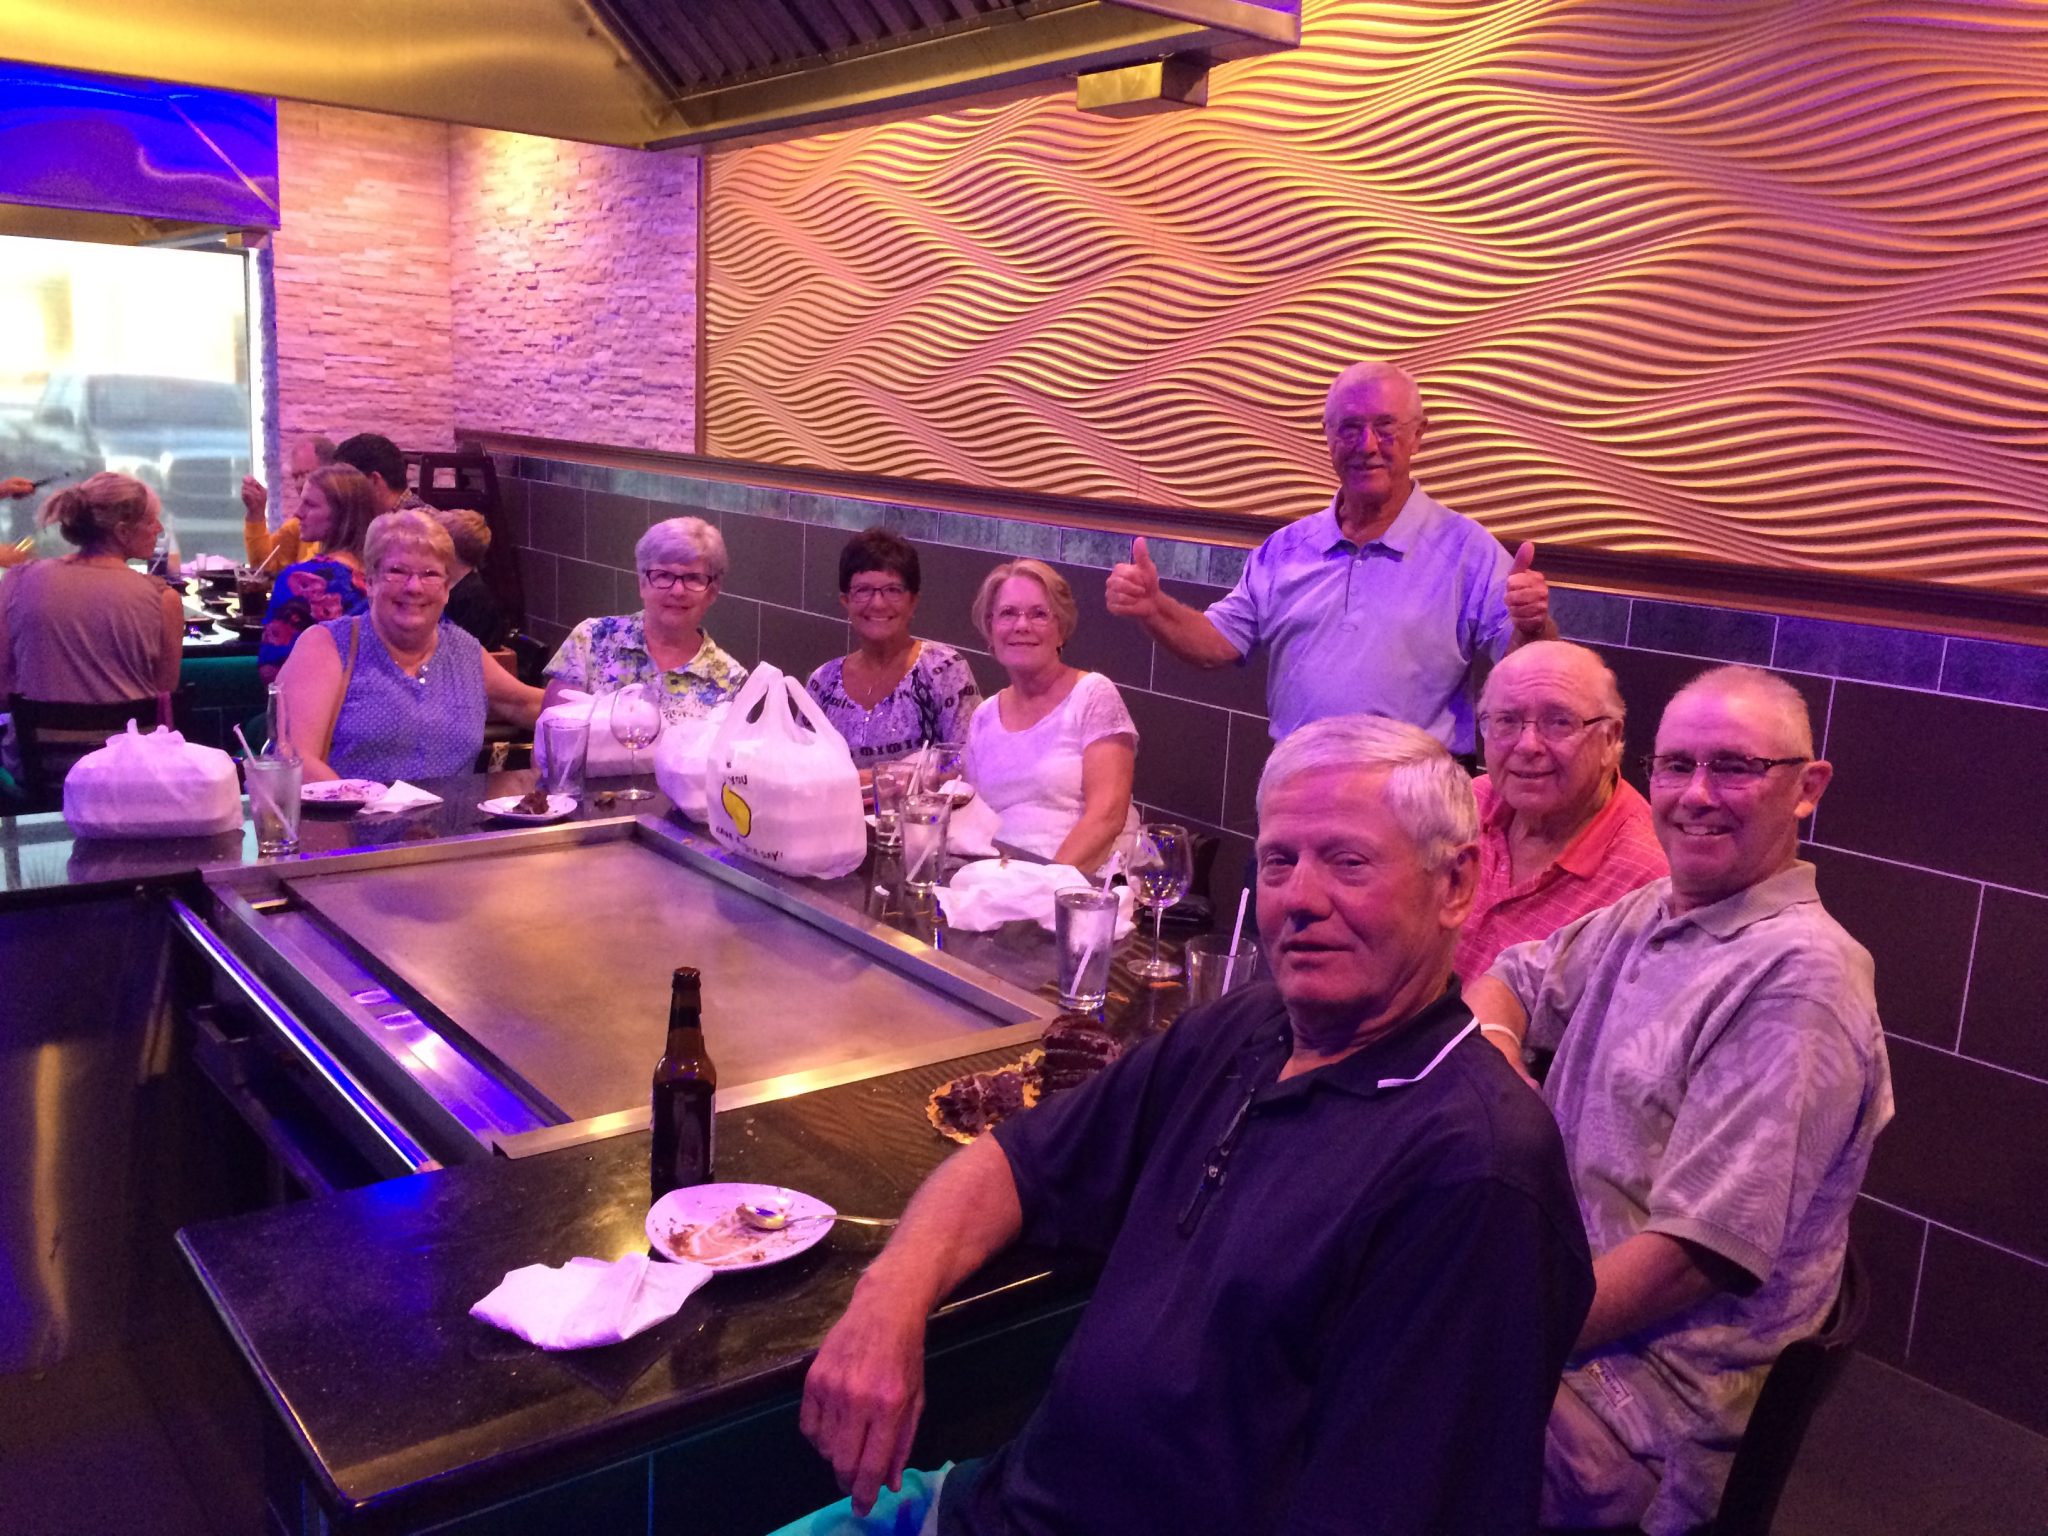 Enjoying an evening at Edo’s Japanese Steakhouse.  What a handsome group!